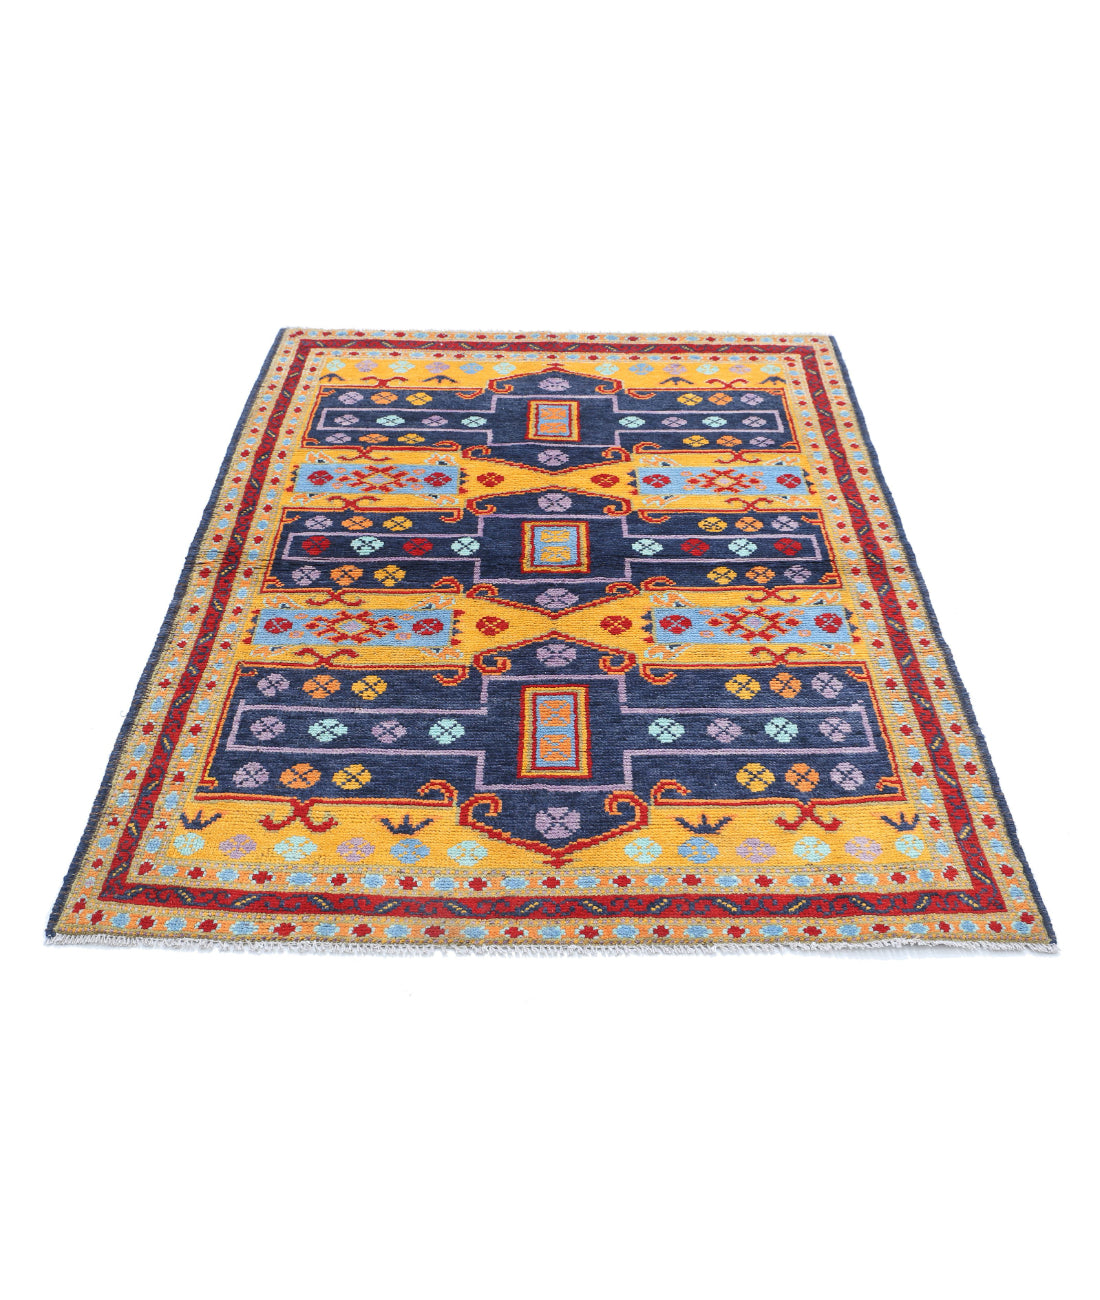 Revival 4'4'' X 5'10'' Hand-Knotted Wool Rug 4'4'' x 5'10'' (130 X 175) / Blue / Red